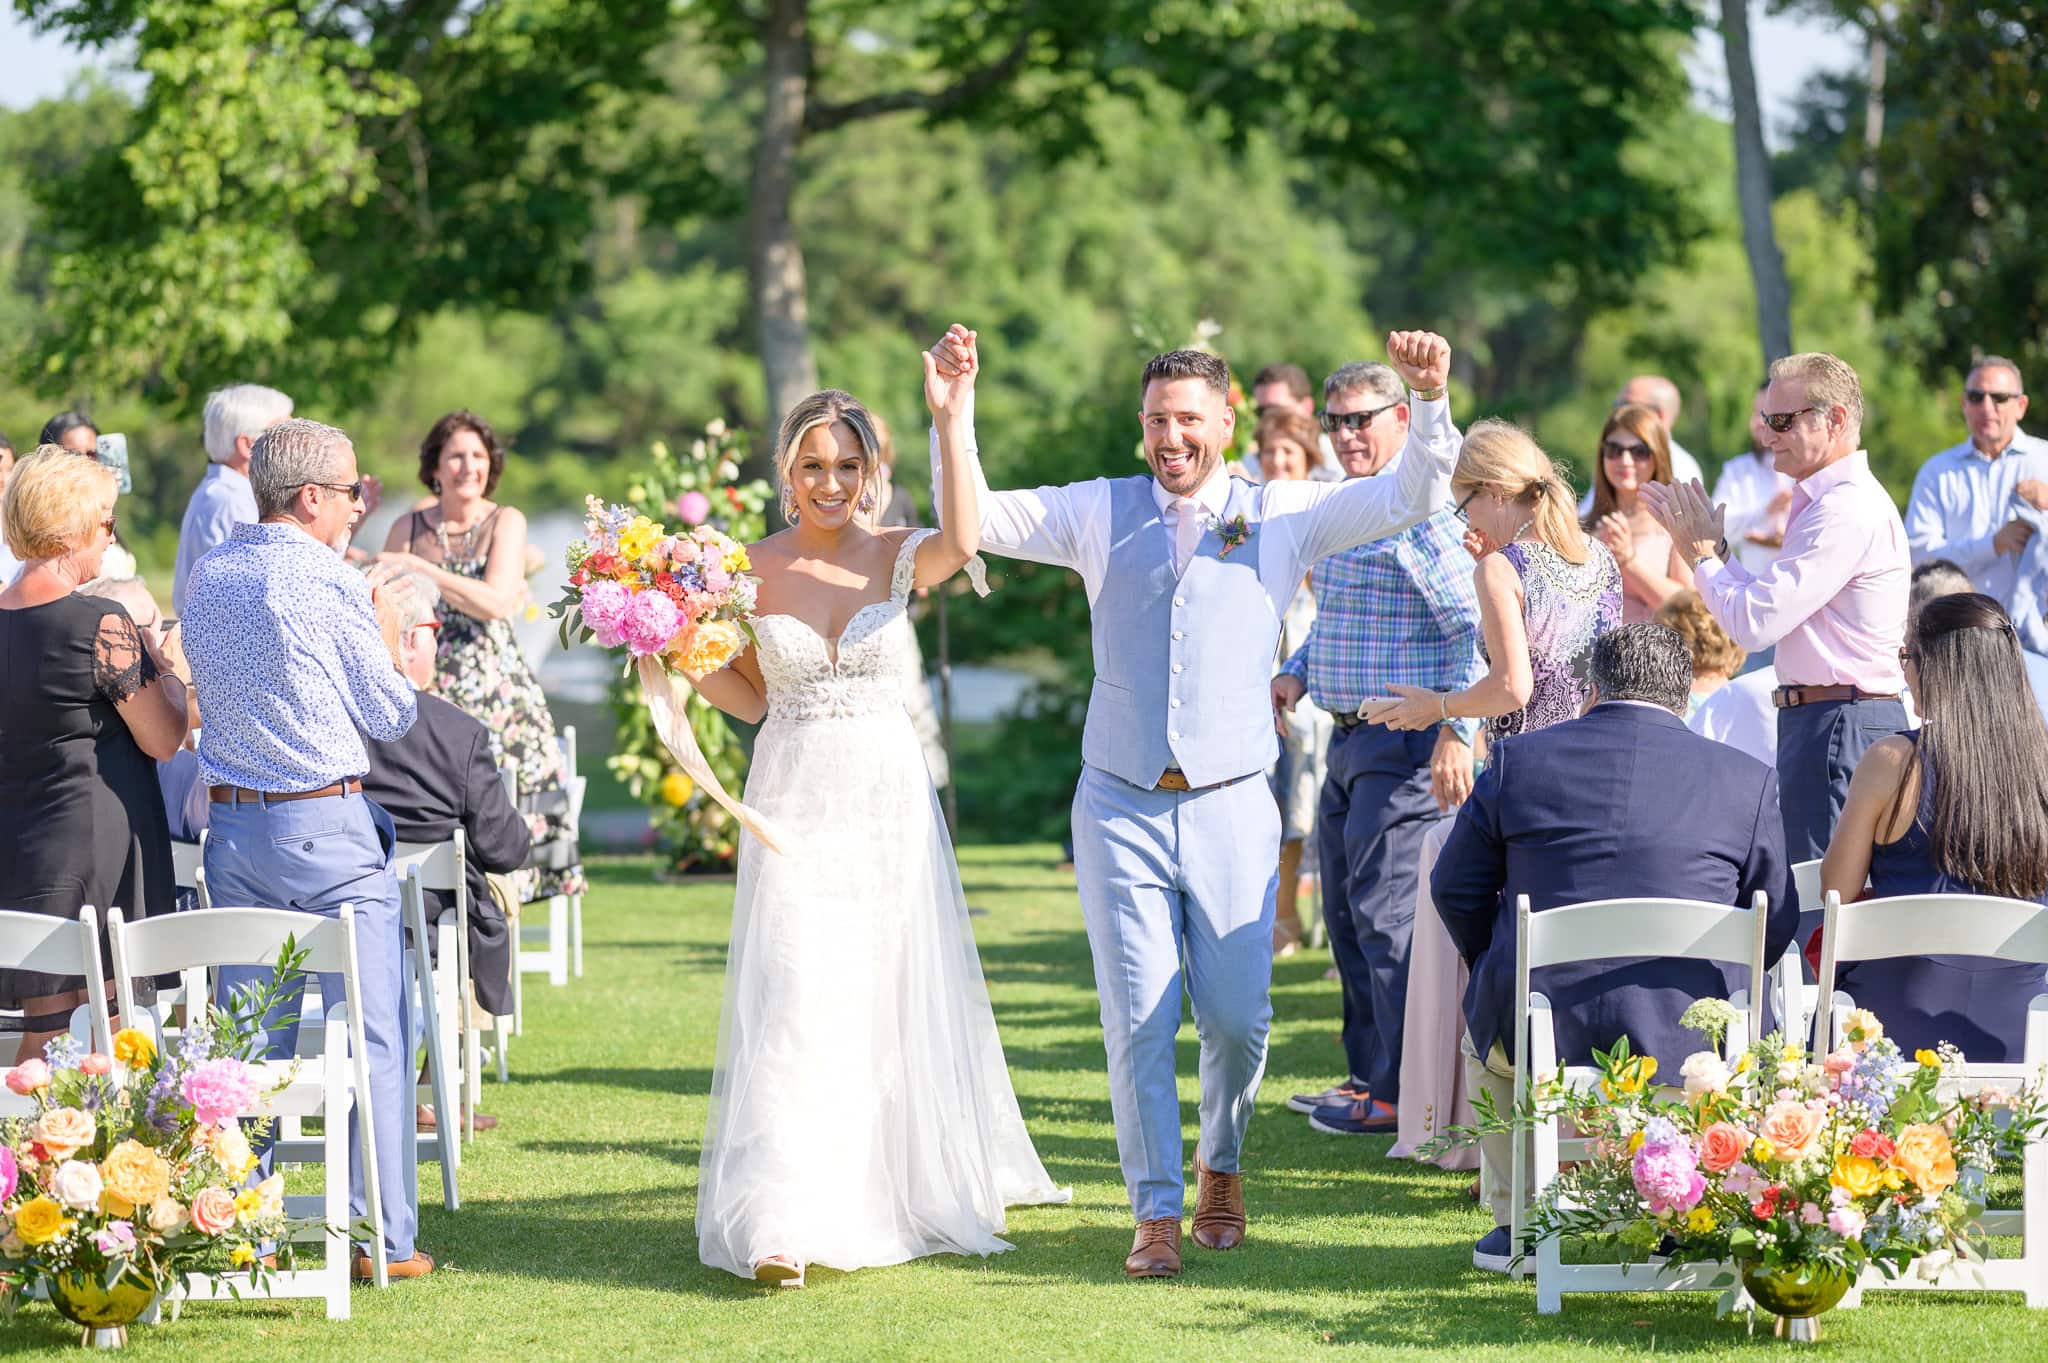 Big cheers after the ceremony - Pawleys Plantation Golf & Country Club